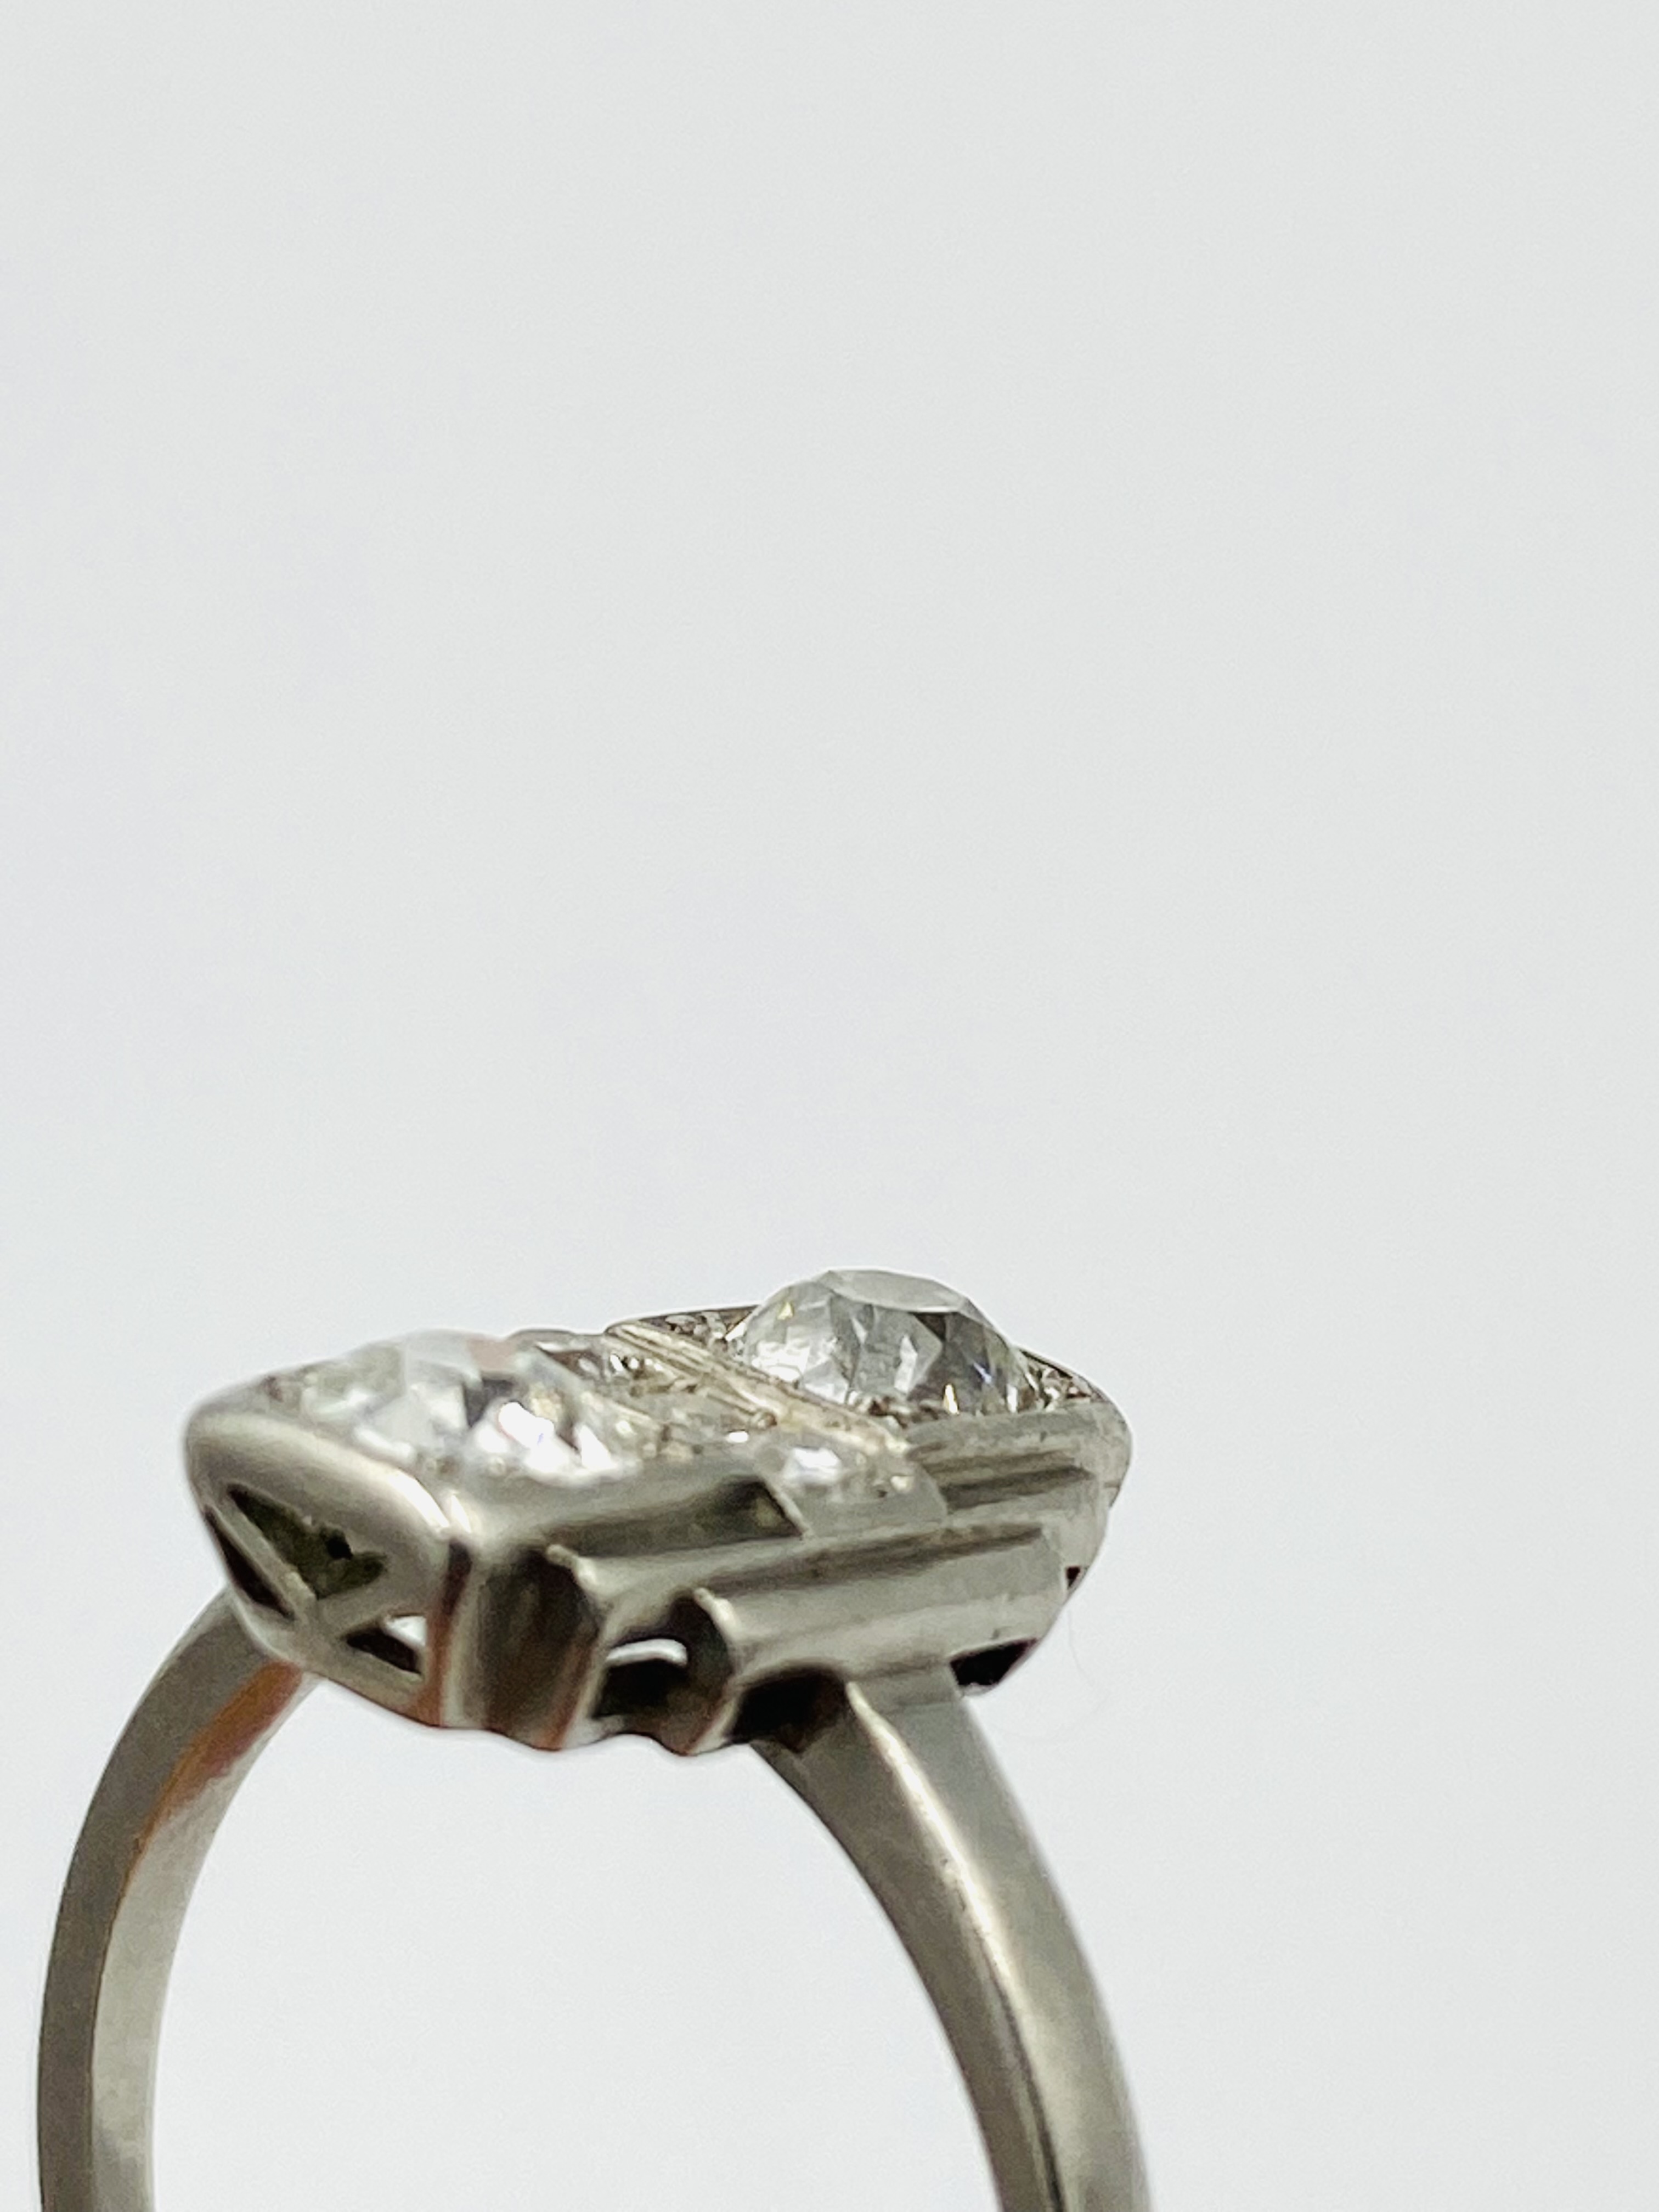 Art deco style platinum and diamond two stone ring - Image 5 of 6